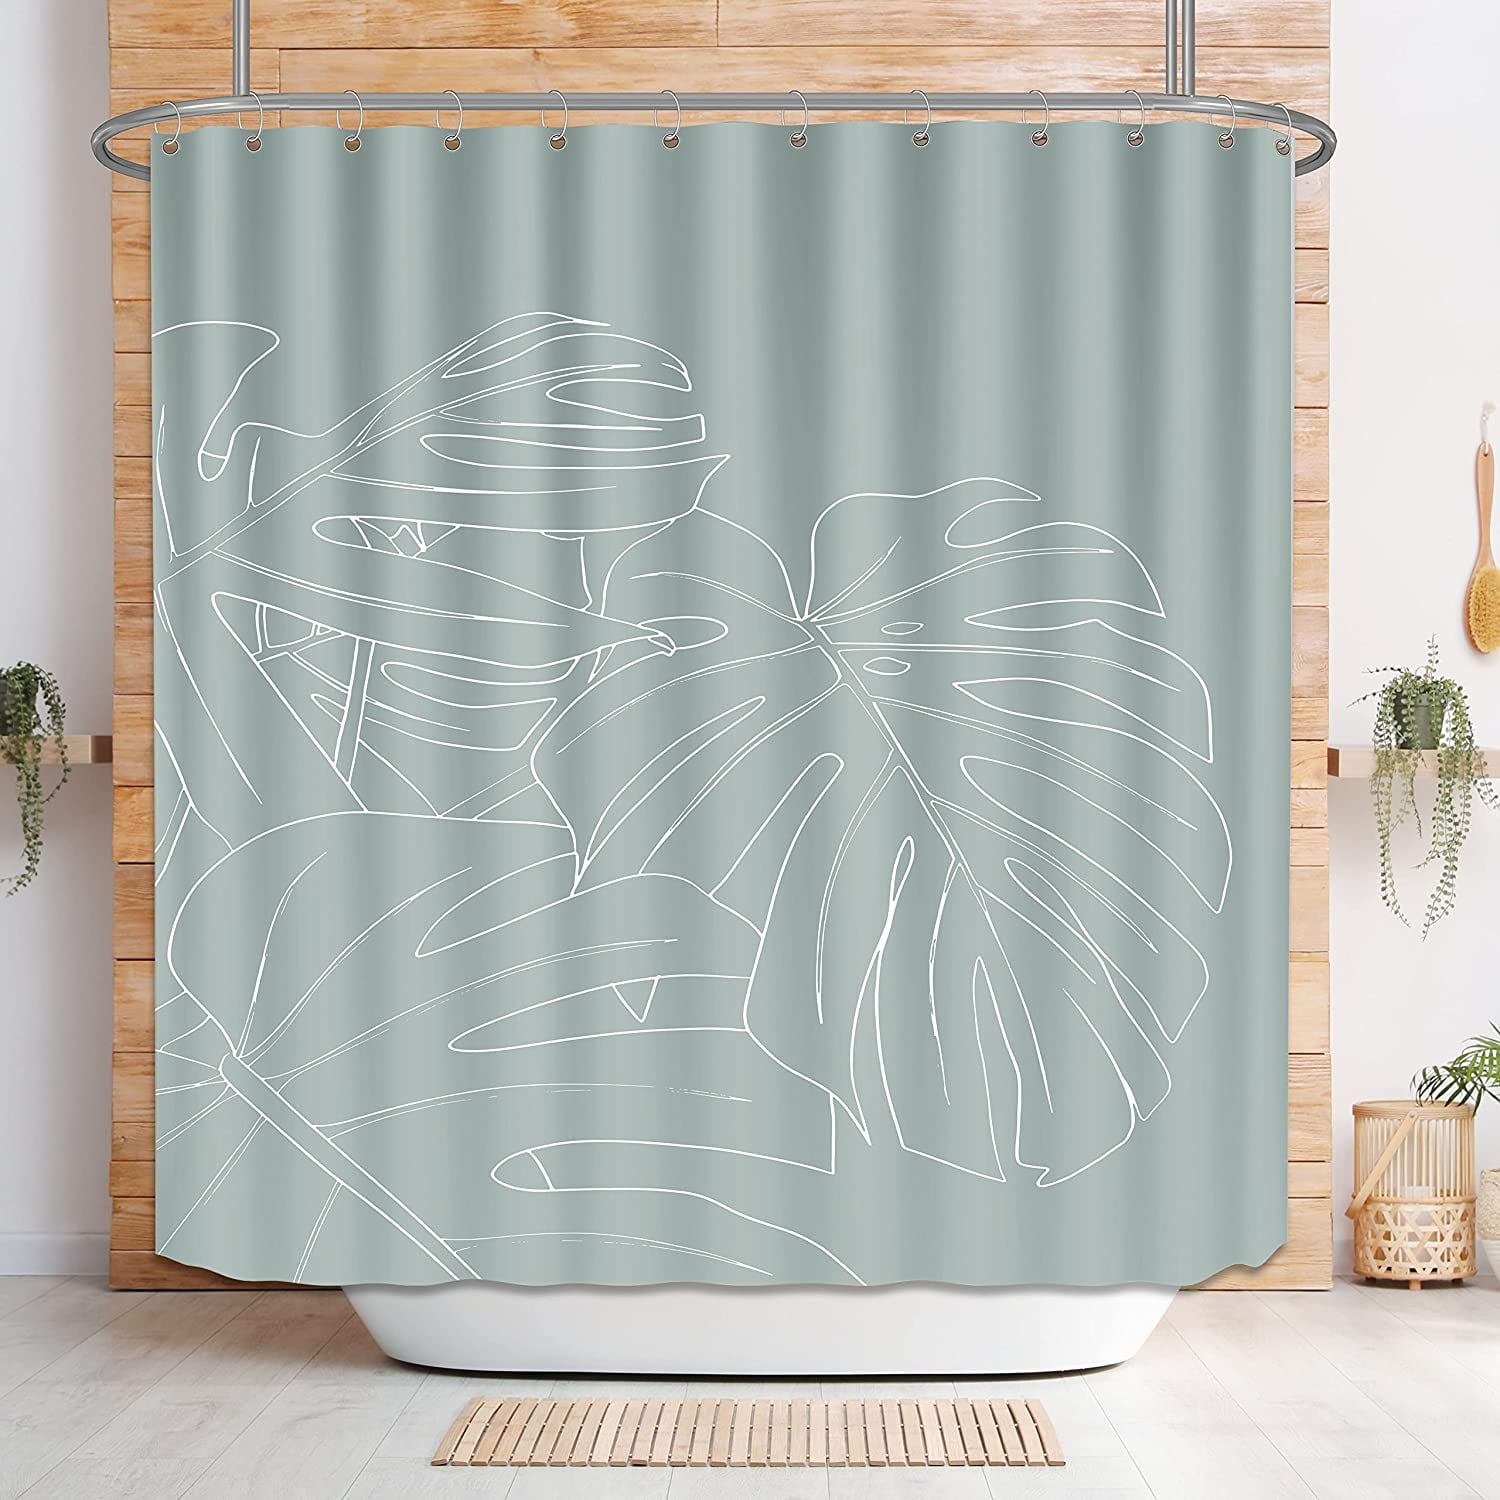 Stall Shower Curtain 36 x 72 - Small Sage Green Waterproof Fabric Shower  Curtains for Bathroom, Decorative Leaf Botanical Themed Bath Curtain with 7  Hooks, Sage Green 